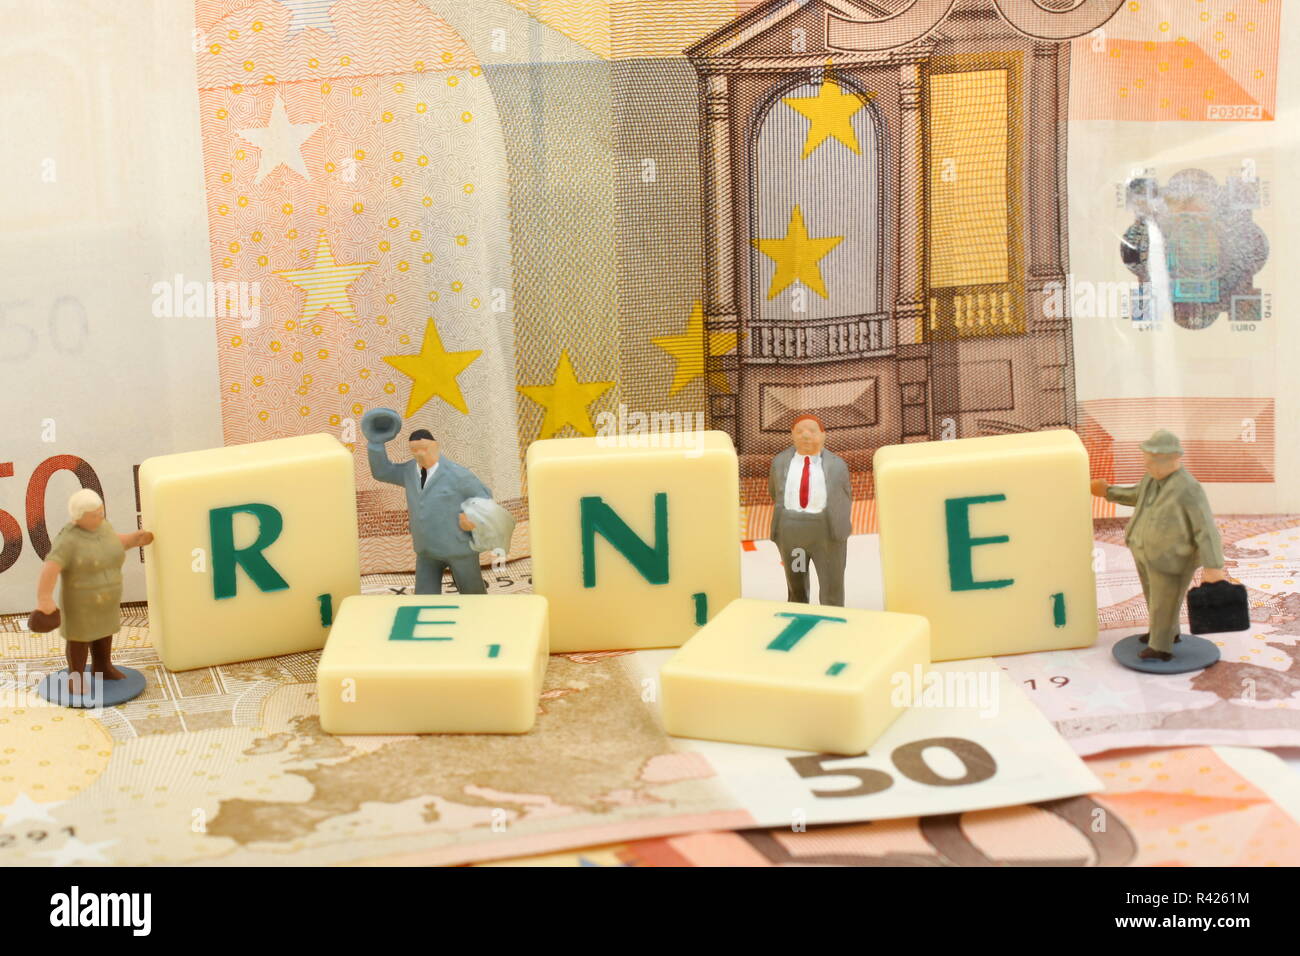 pension word to image plates,money,retired in the background Stock Photo